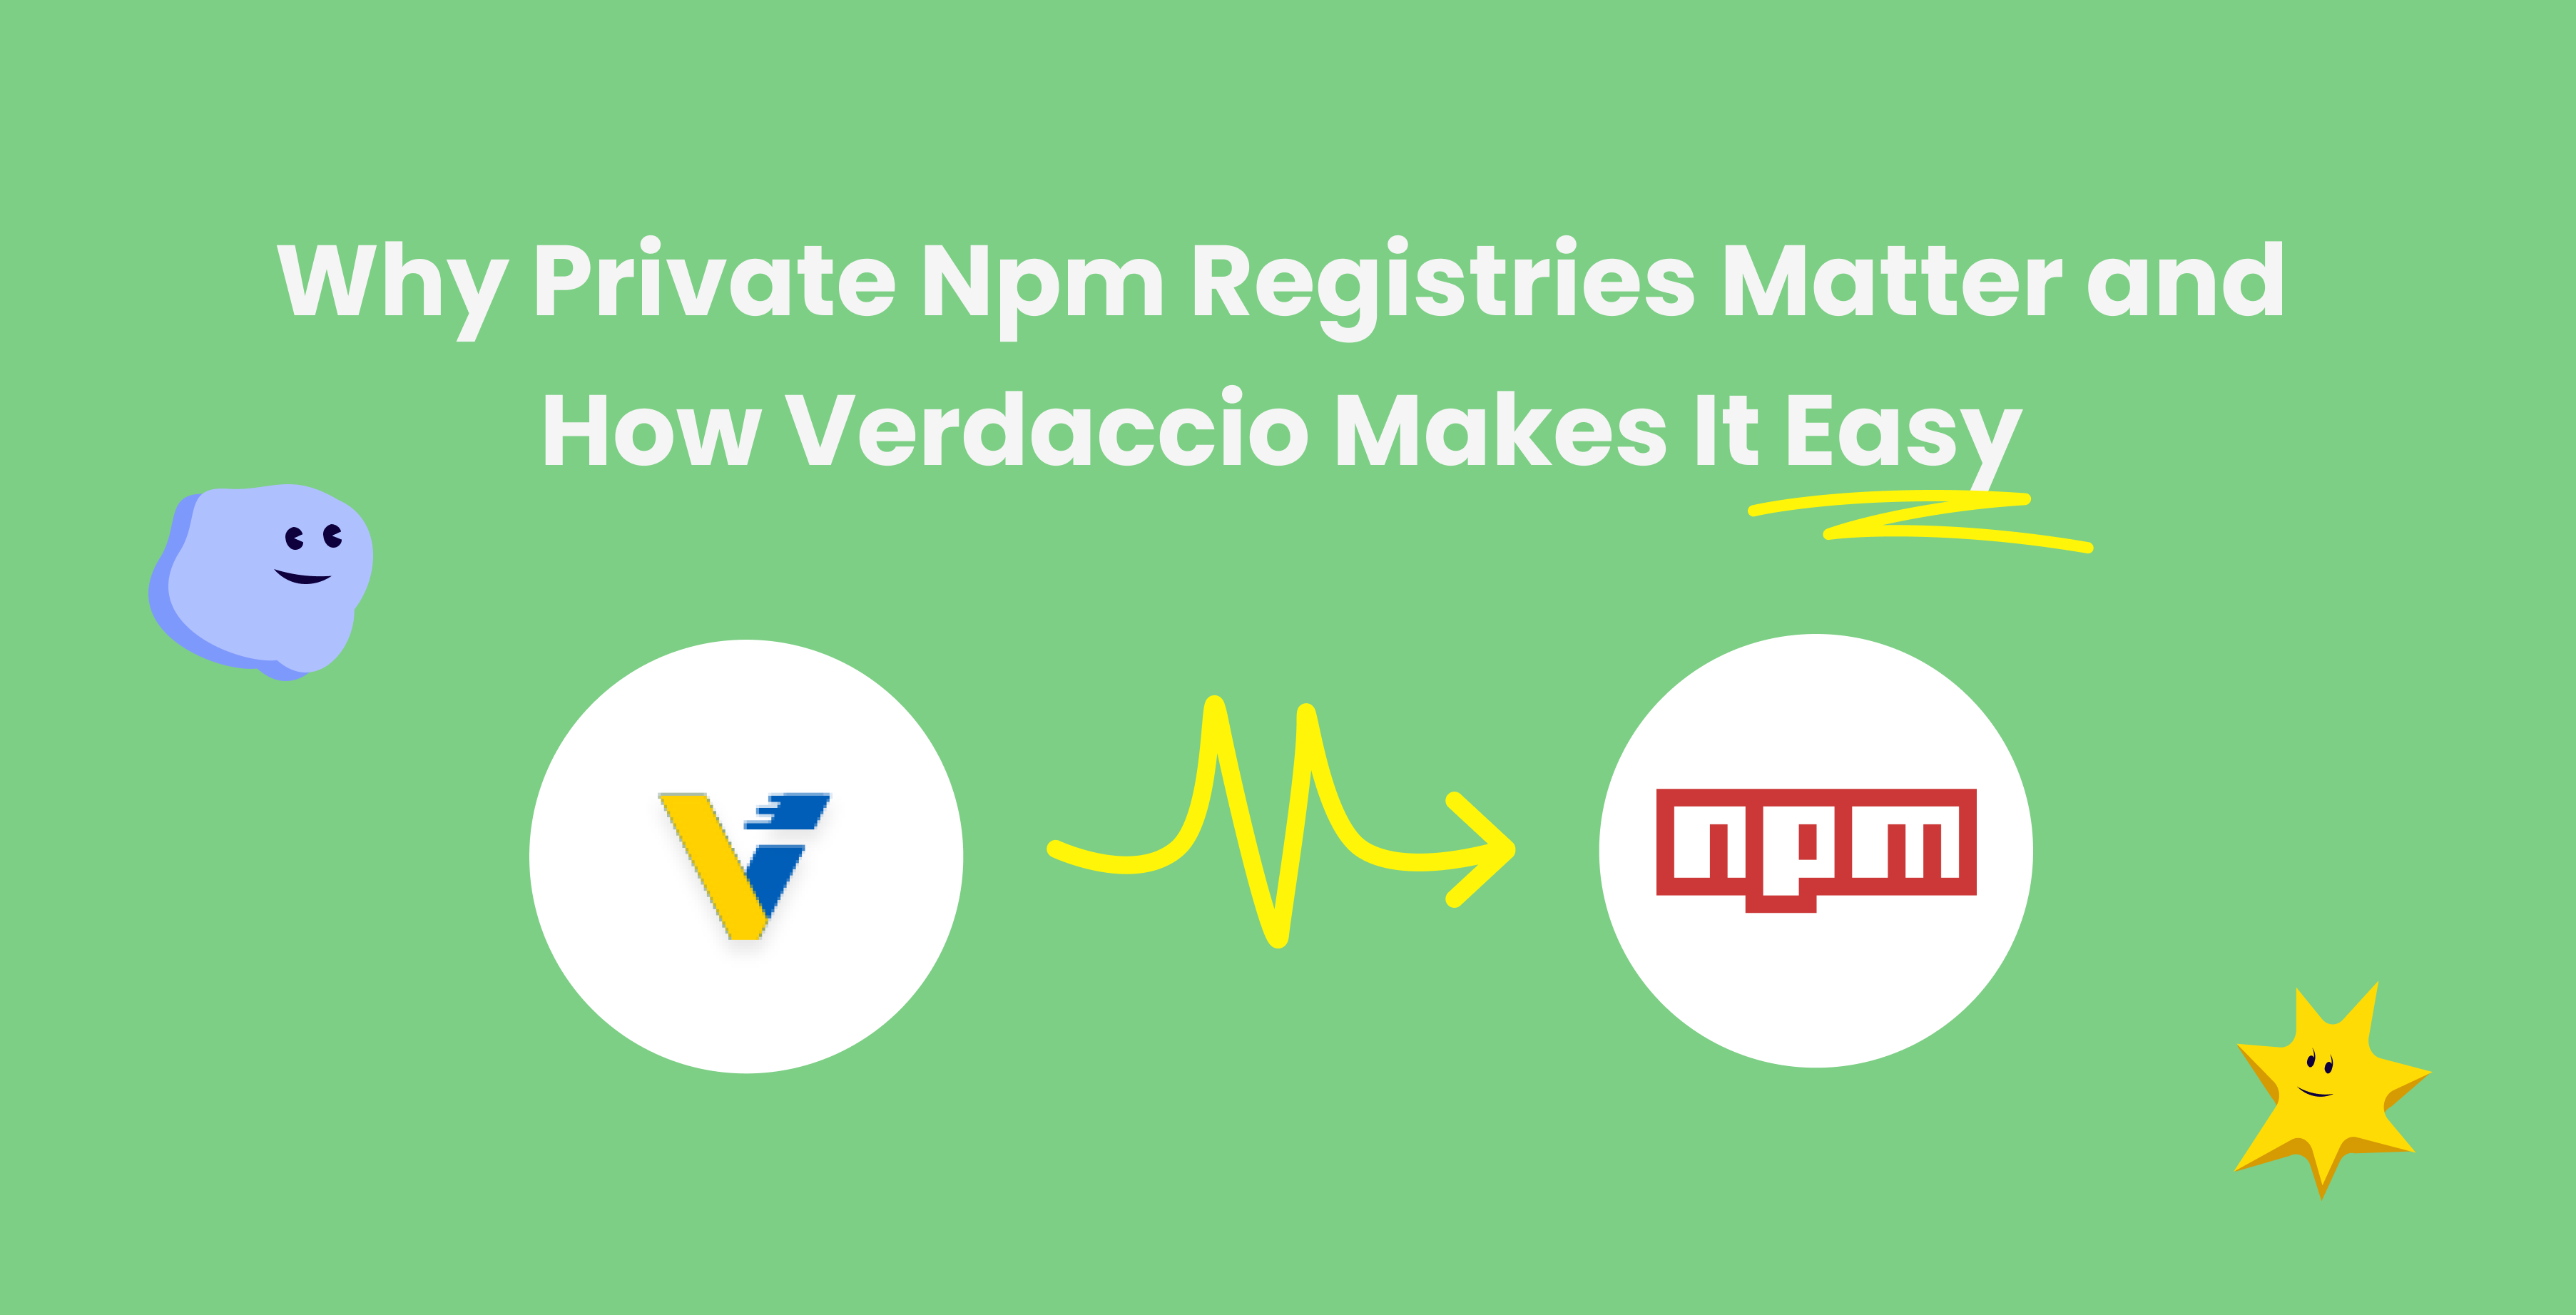 Why Private Npm Registries Matter and How Verdaccio Makes It Easy